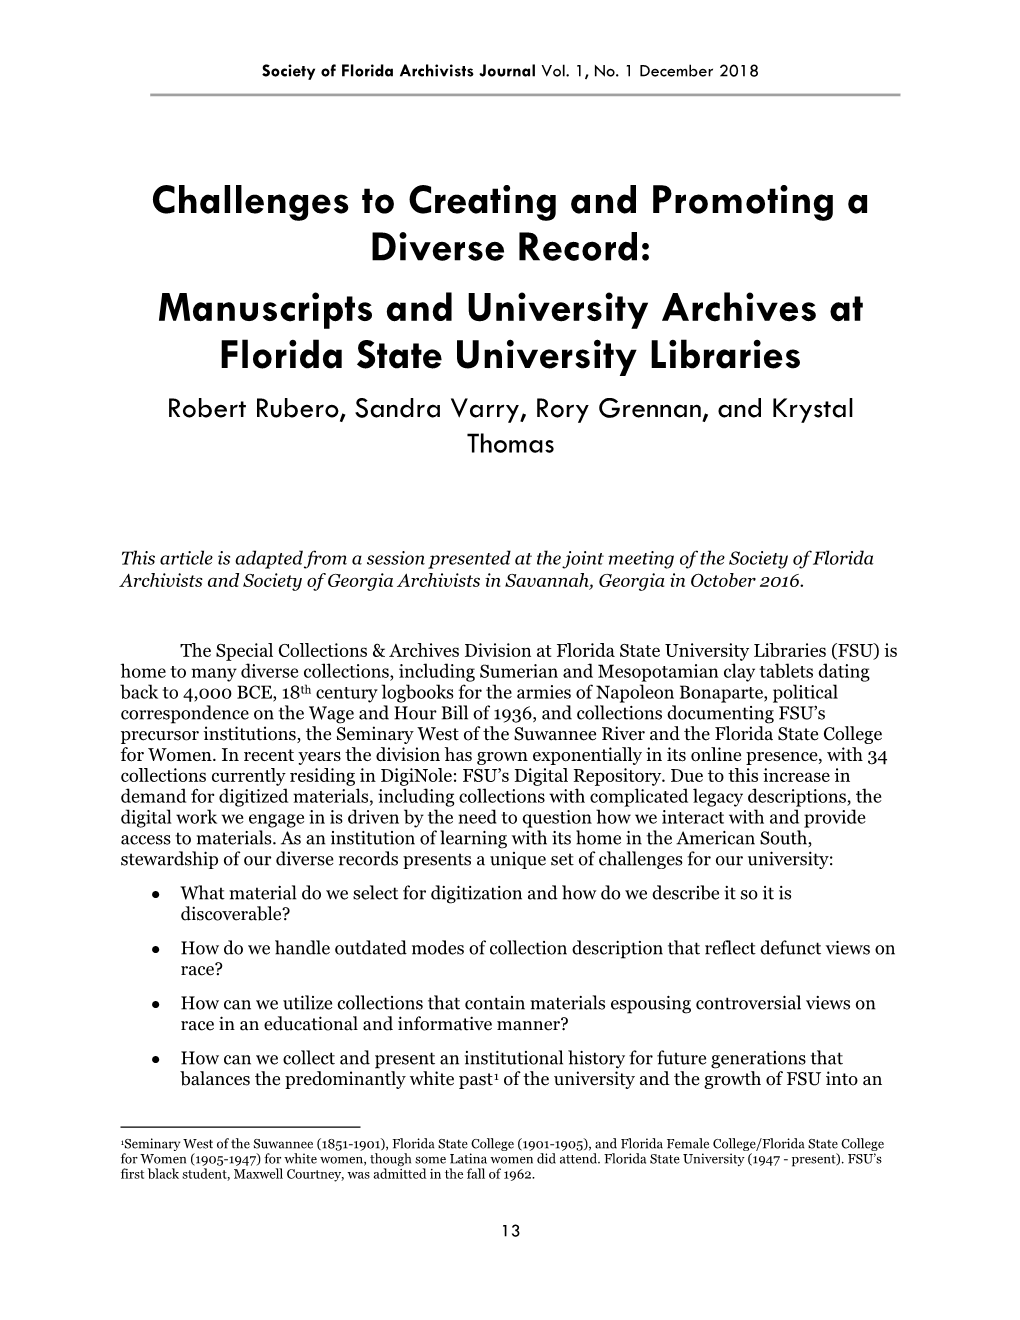 Challenges to Creating and Promoting a Diverse Record: Manuscripts